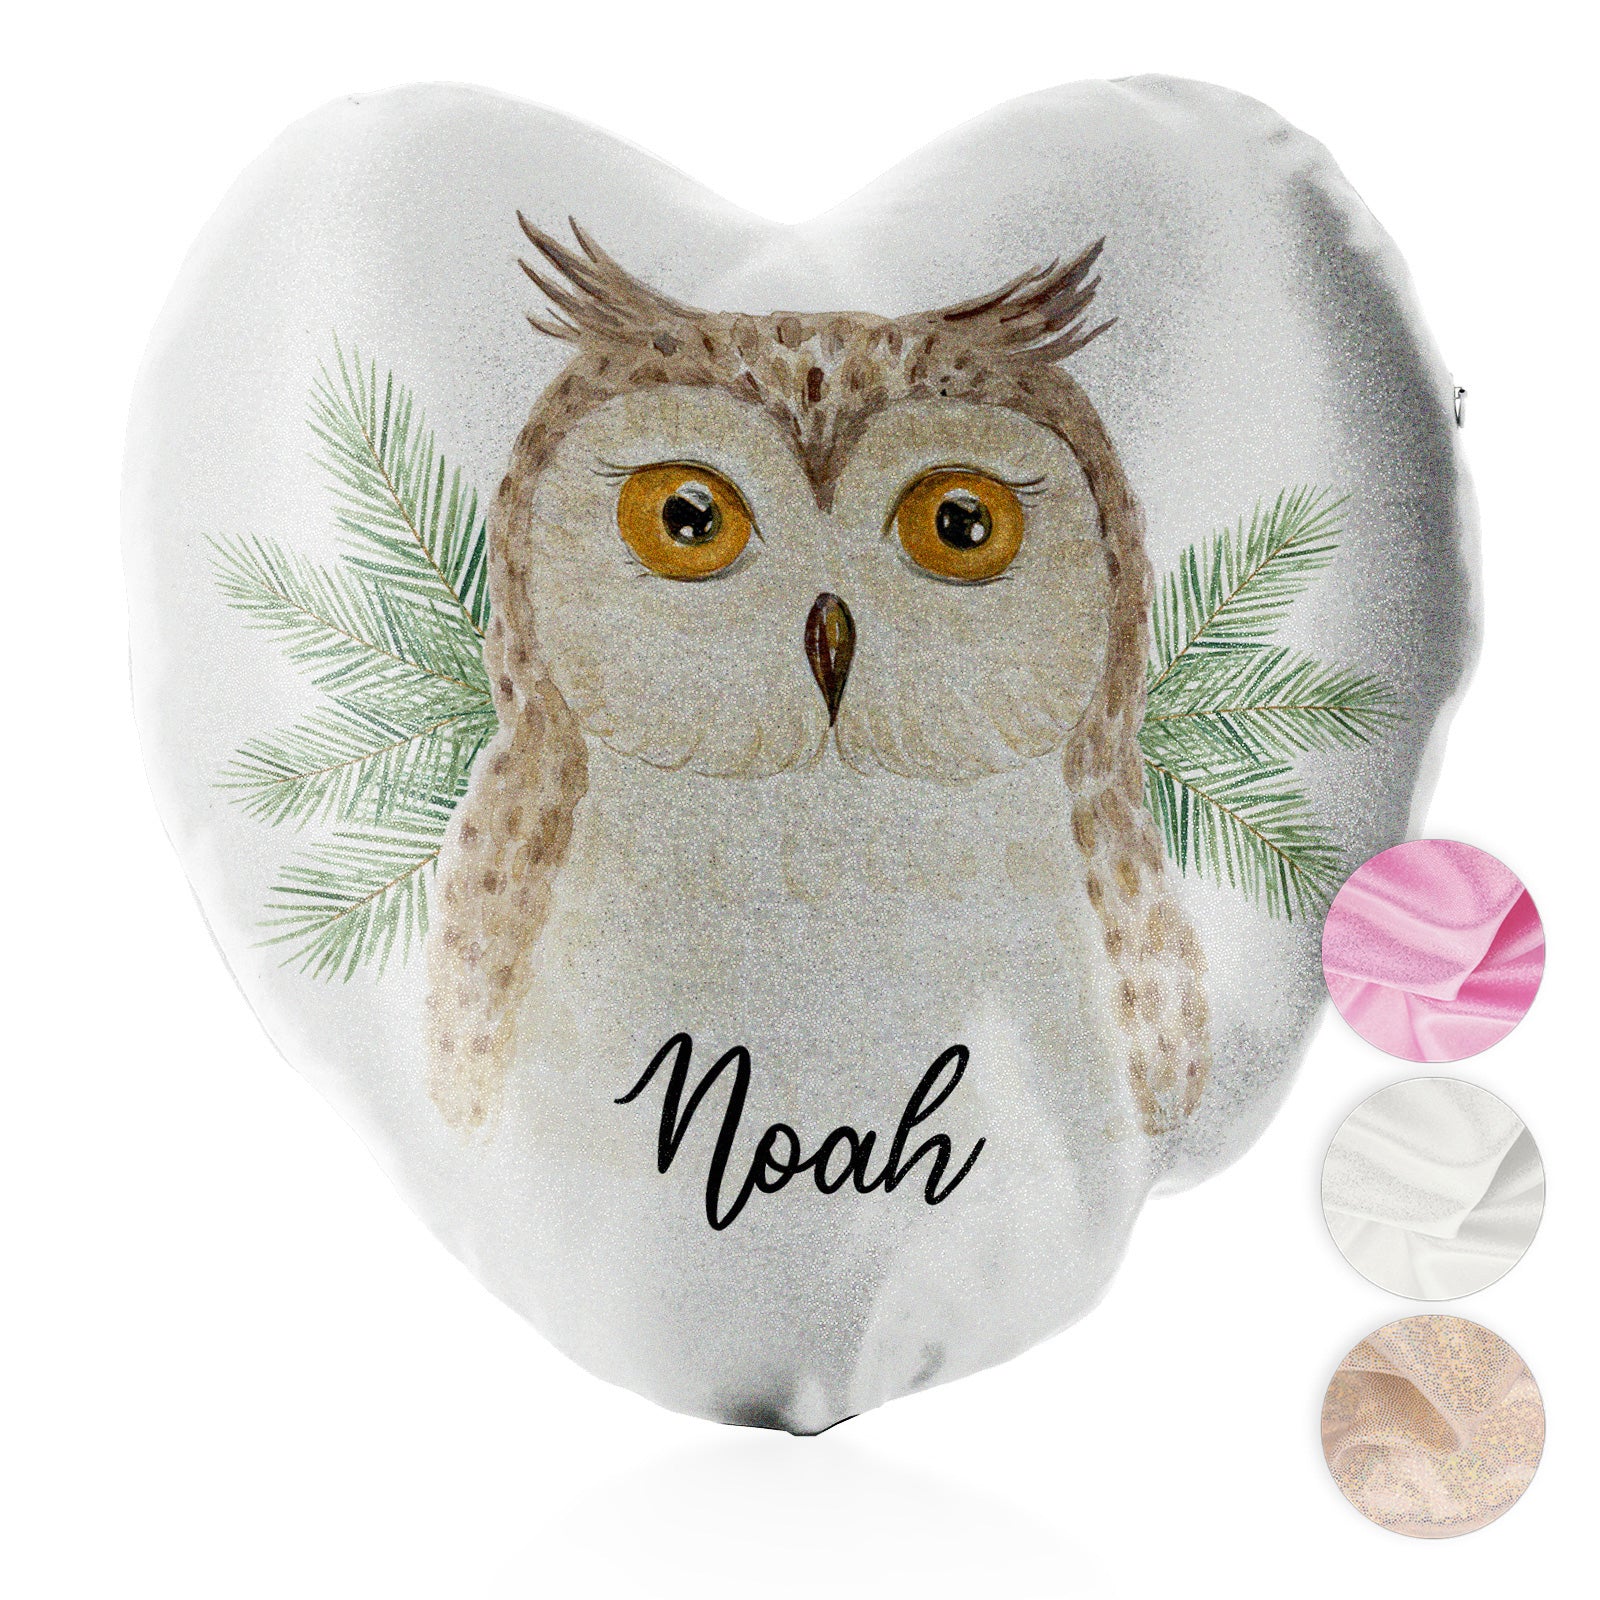 Personalised Glitter Heart Cushion with Brown Owl Pine Tree and Cute Text